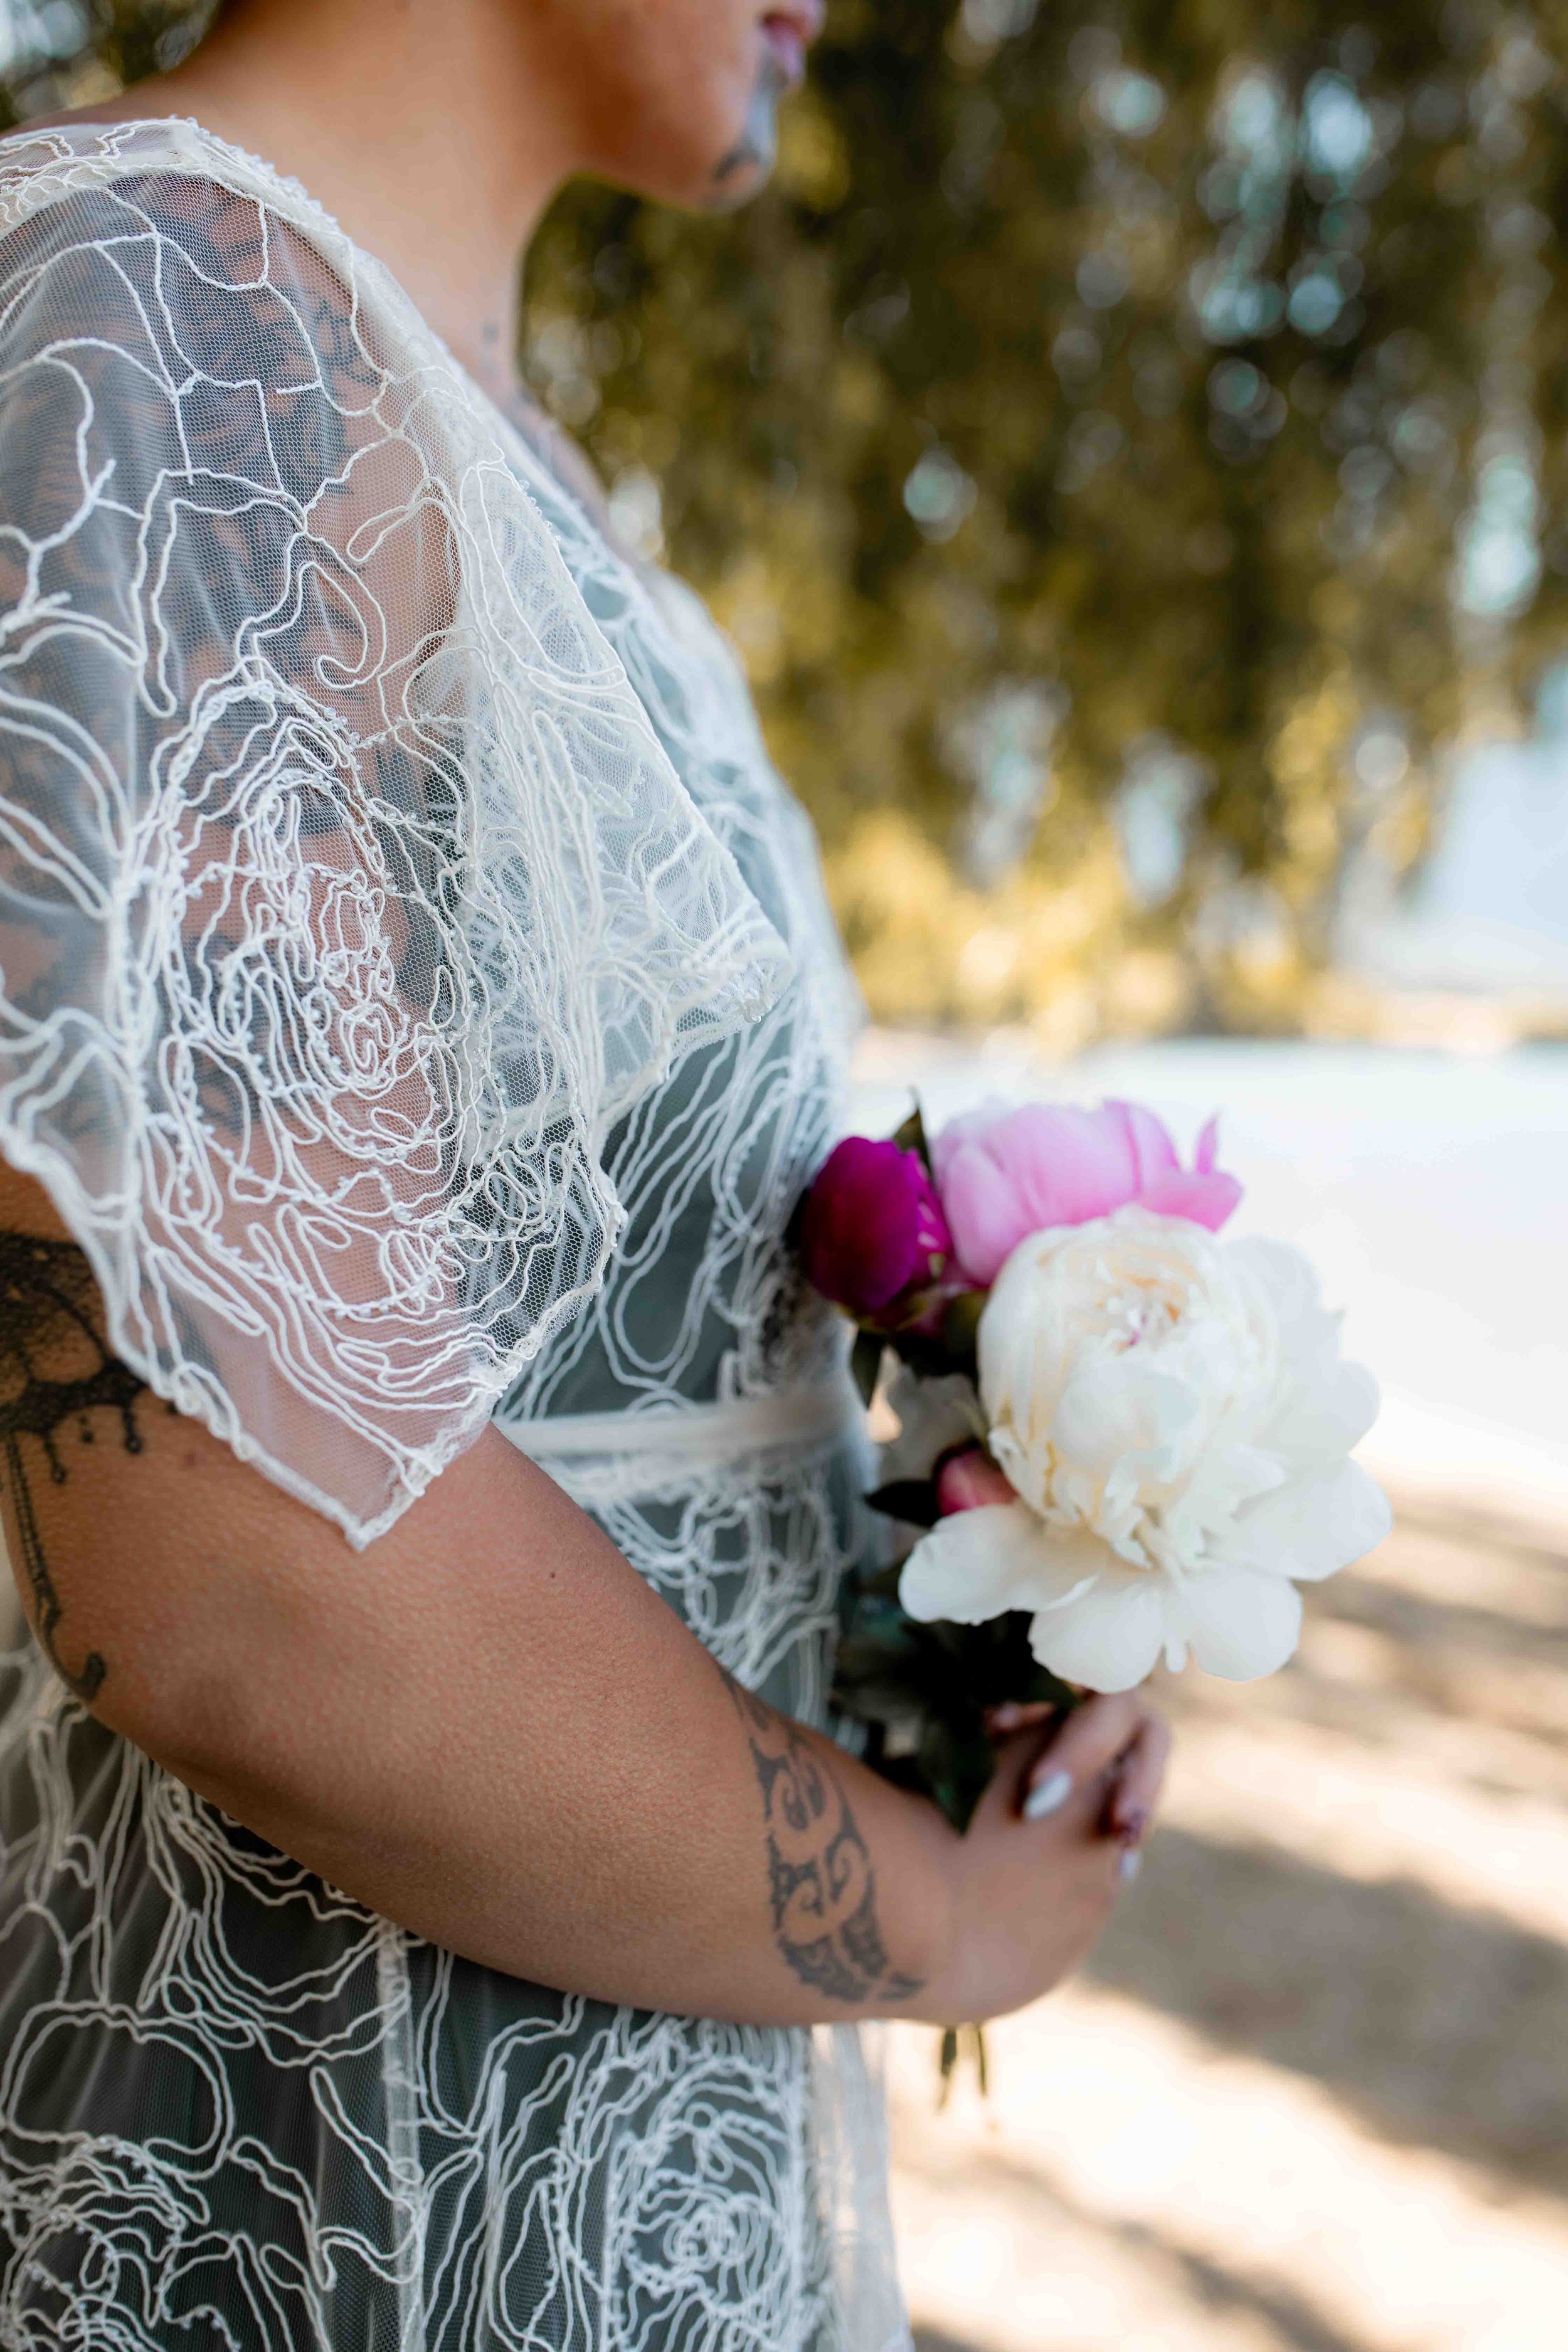 Sofia Wrap in Peony Lace +Harper Slip Dress in Olive - Nemo Bridal Couture Queenstown New Zealand 0V9A2408.jpg